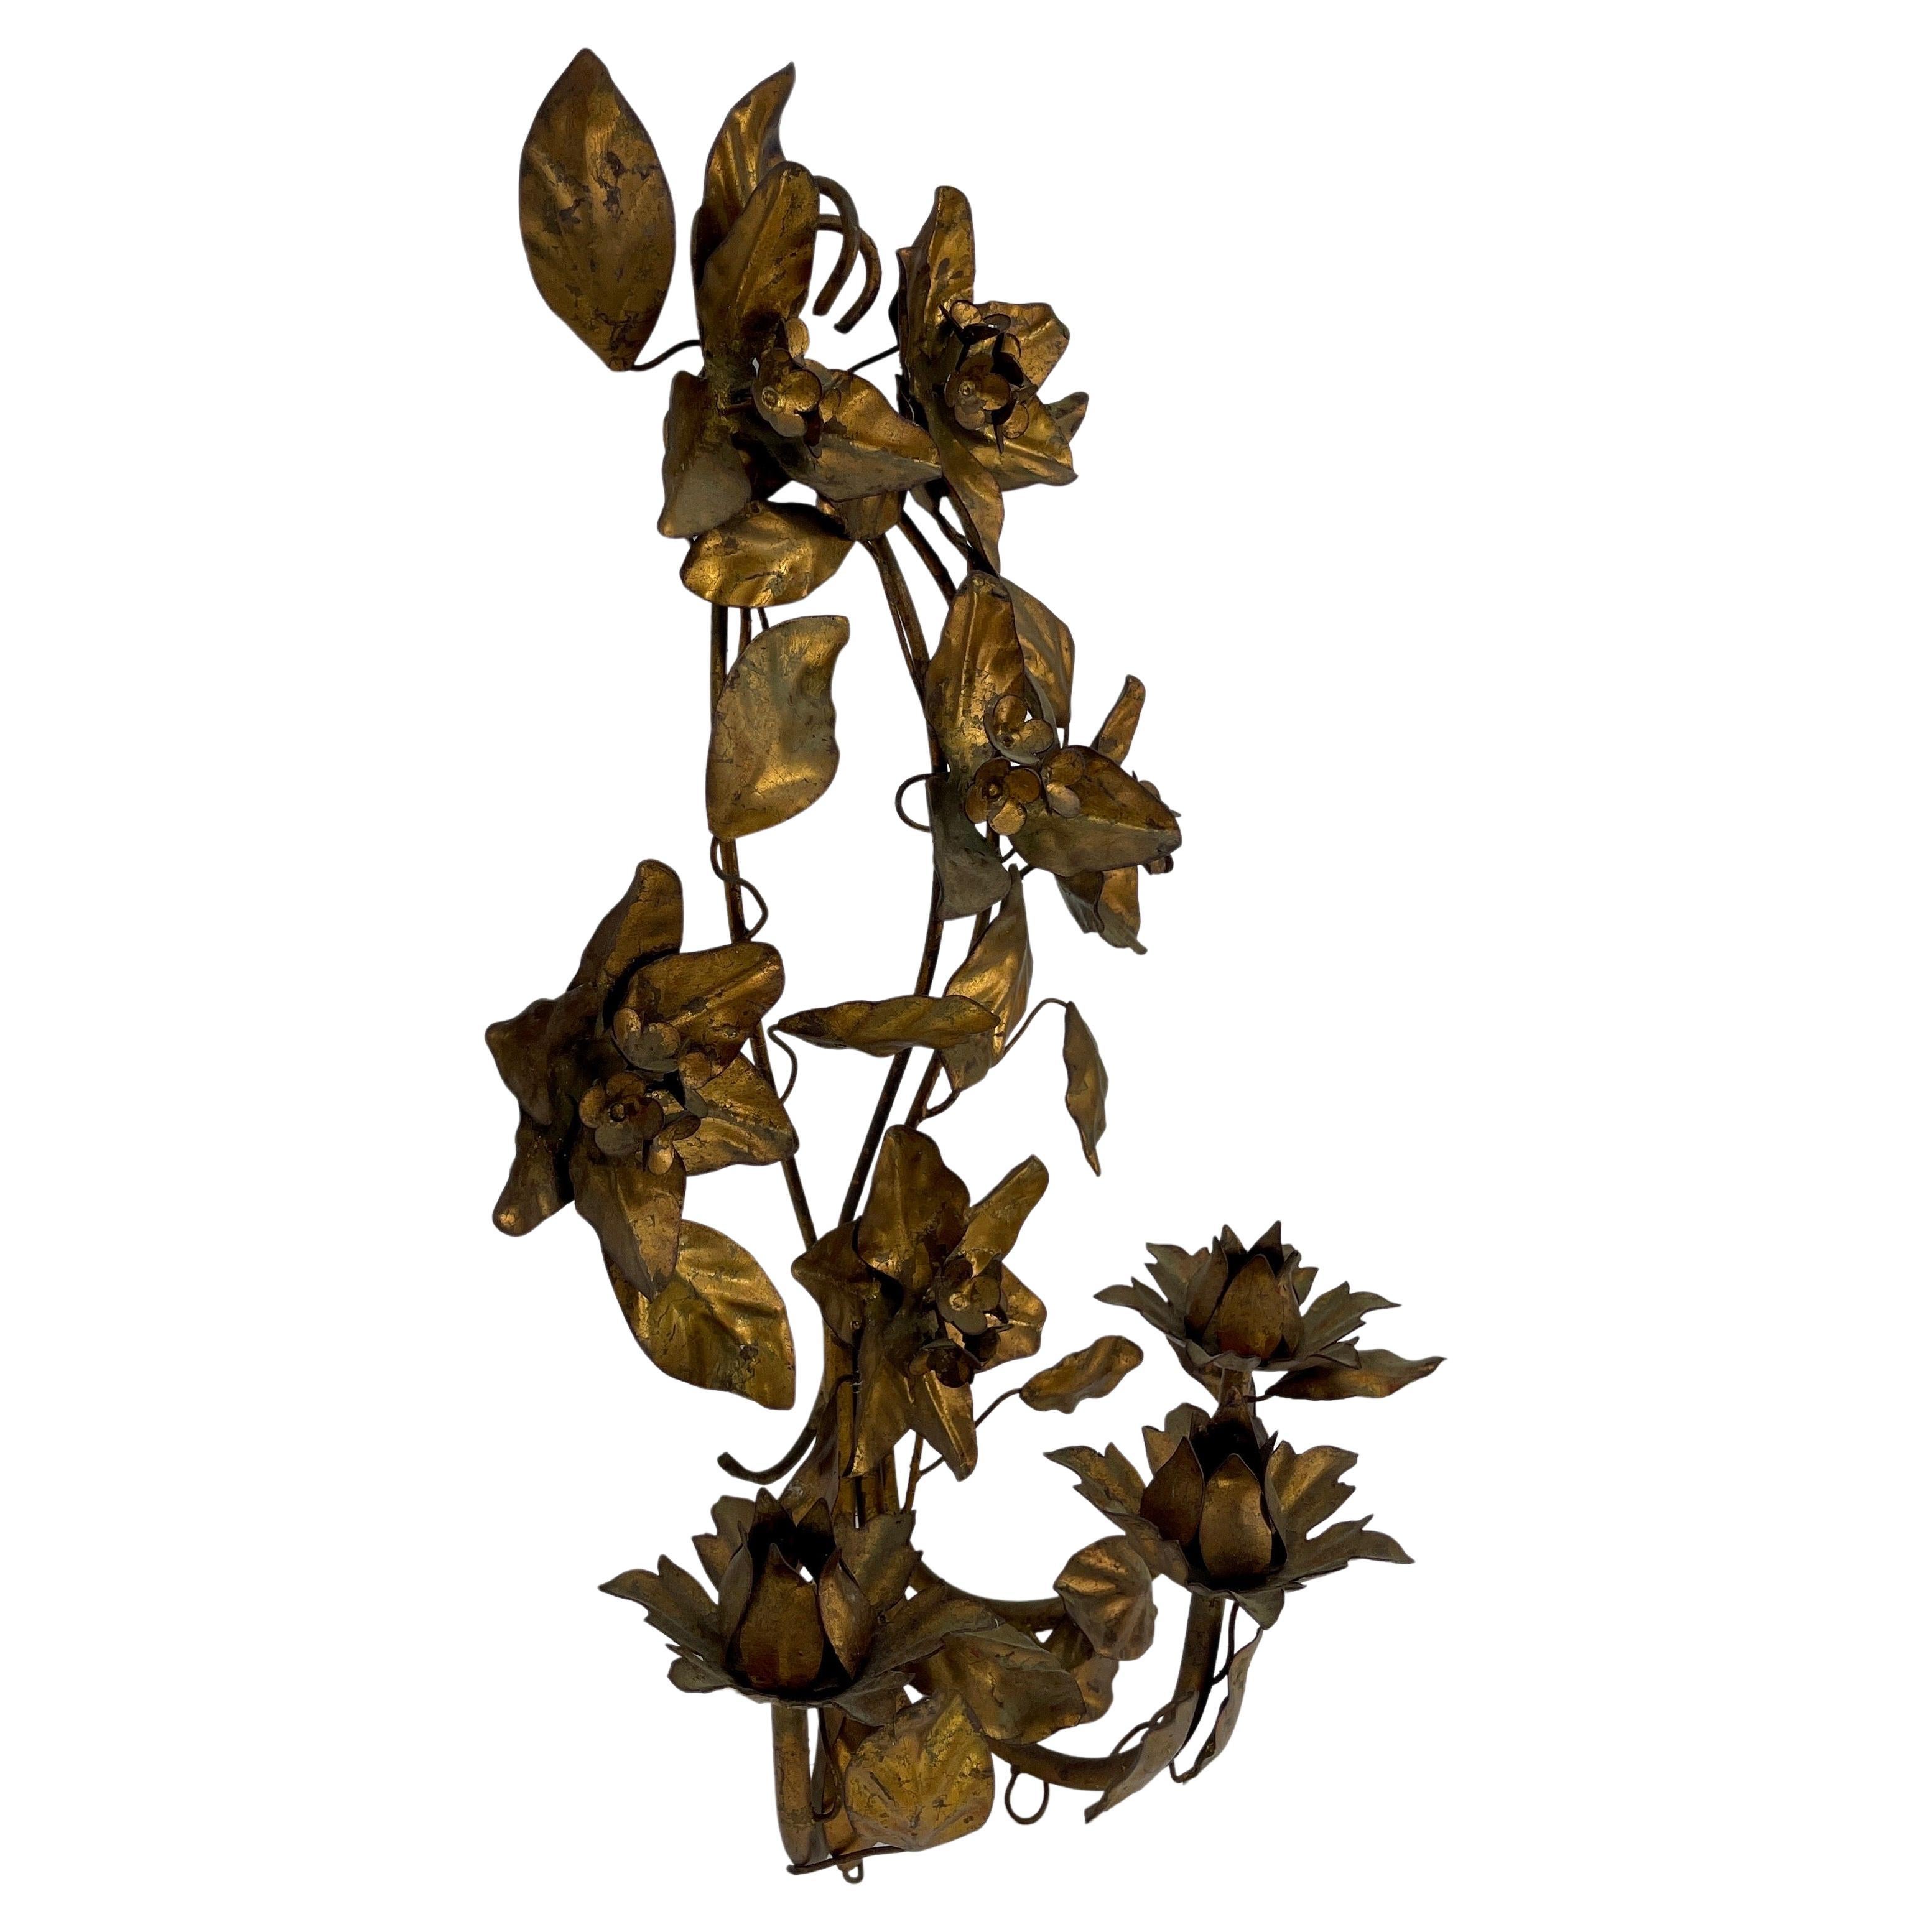 Vintage Gold Gilt Tole Metal Wall Floral Candle Sconce, Italy 

Elegant wall candle sconce with beautiful floral leaf detail throughout. The hand-painted gold gilded finish on this piece has a very pleasing aged look. This classic and very detailed